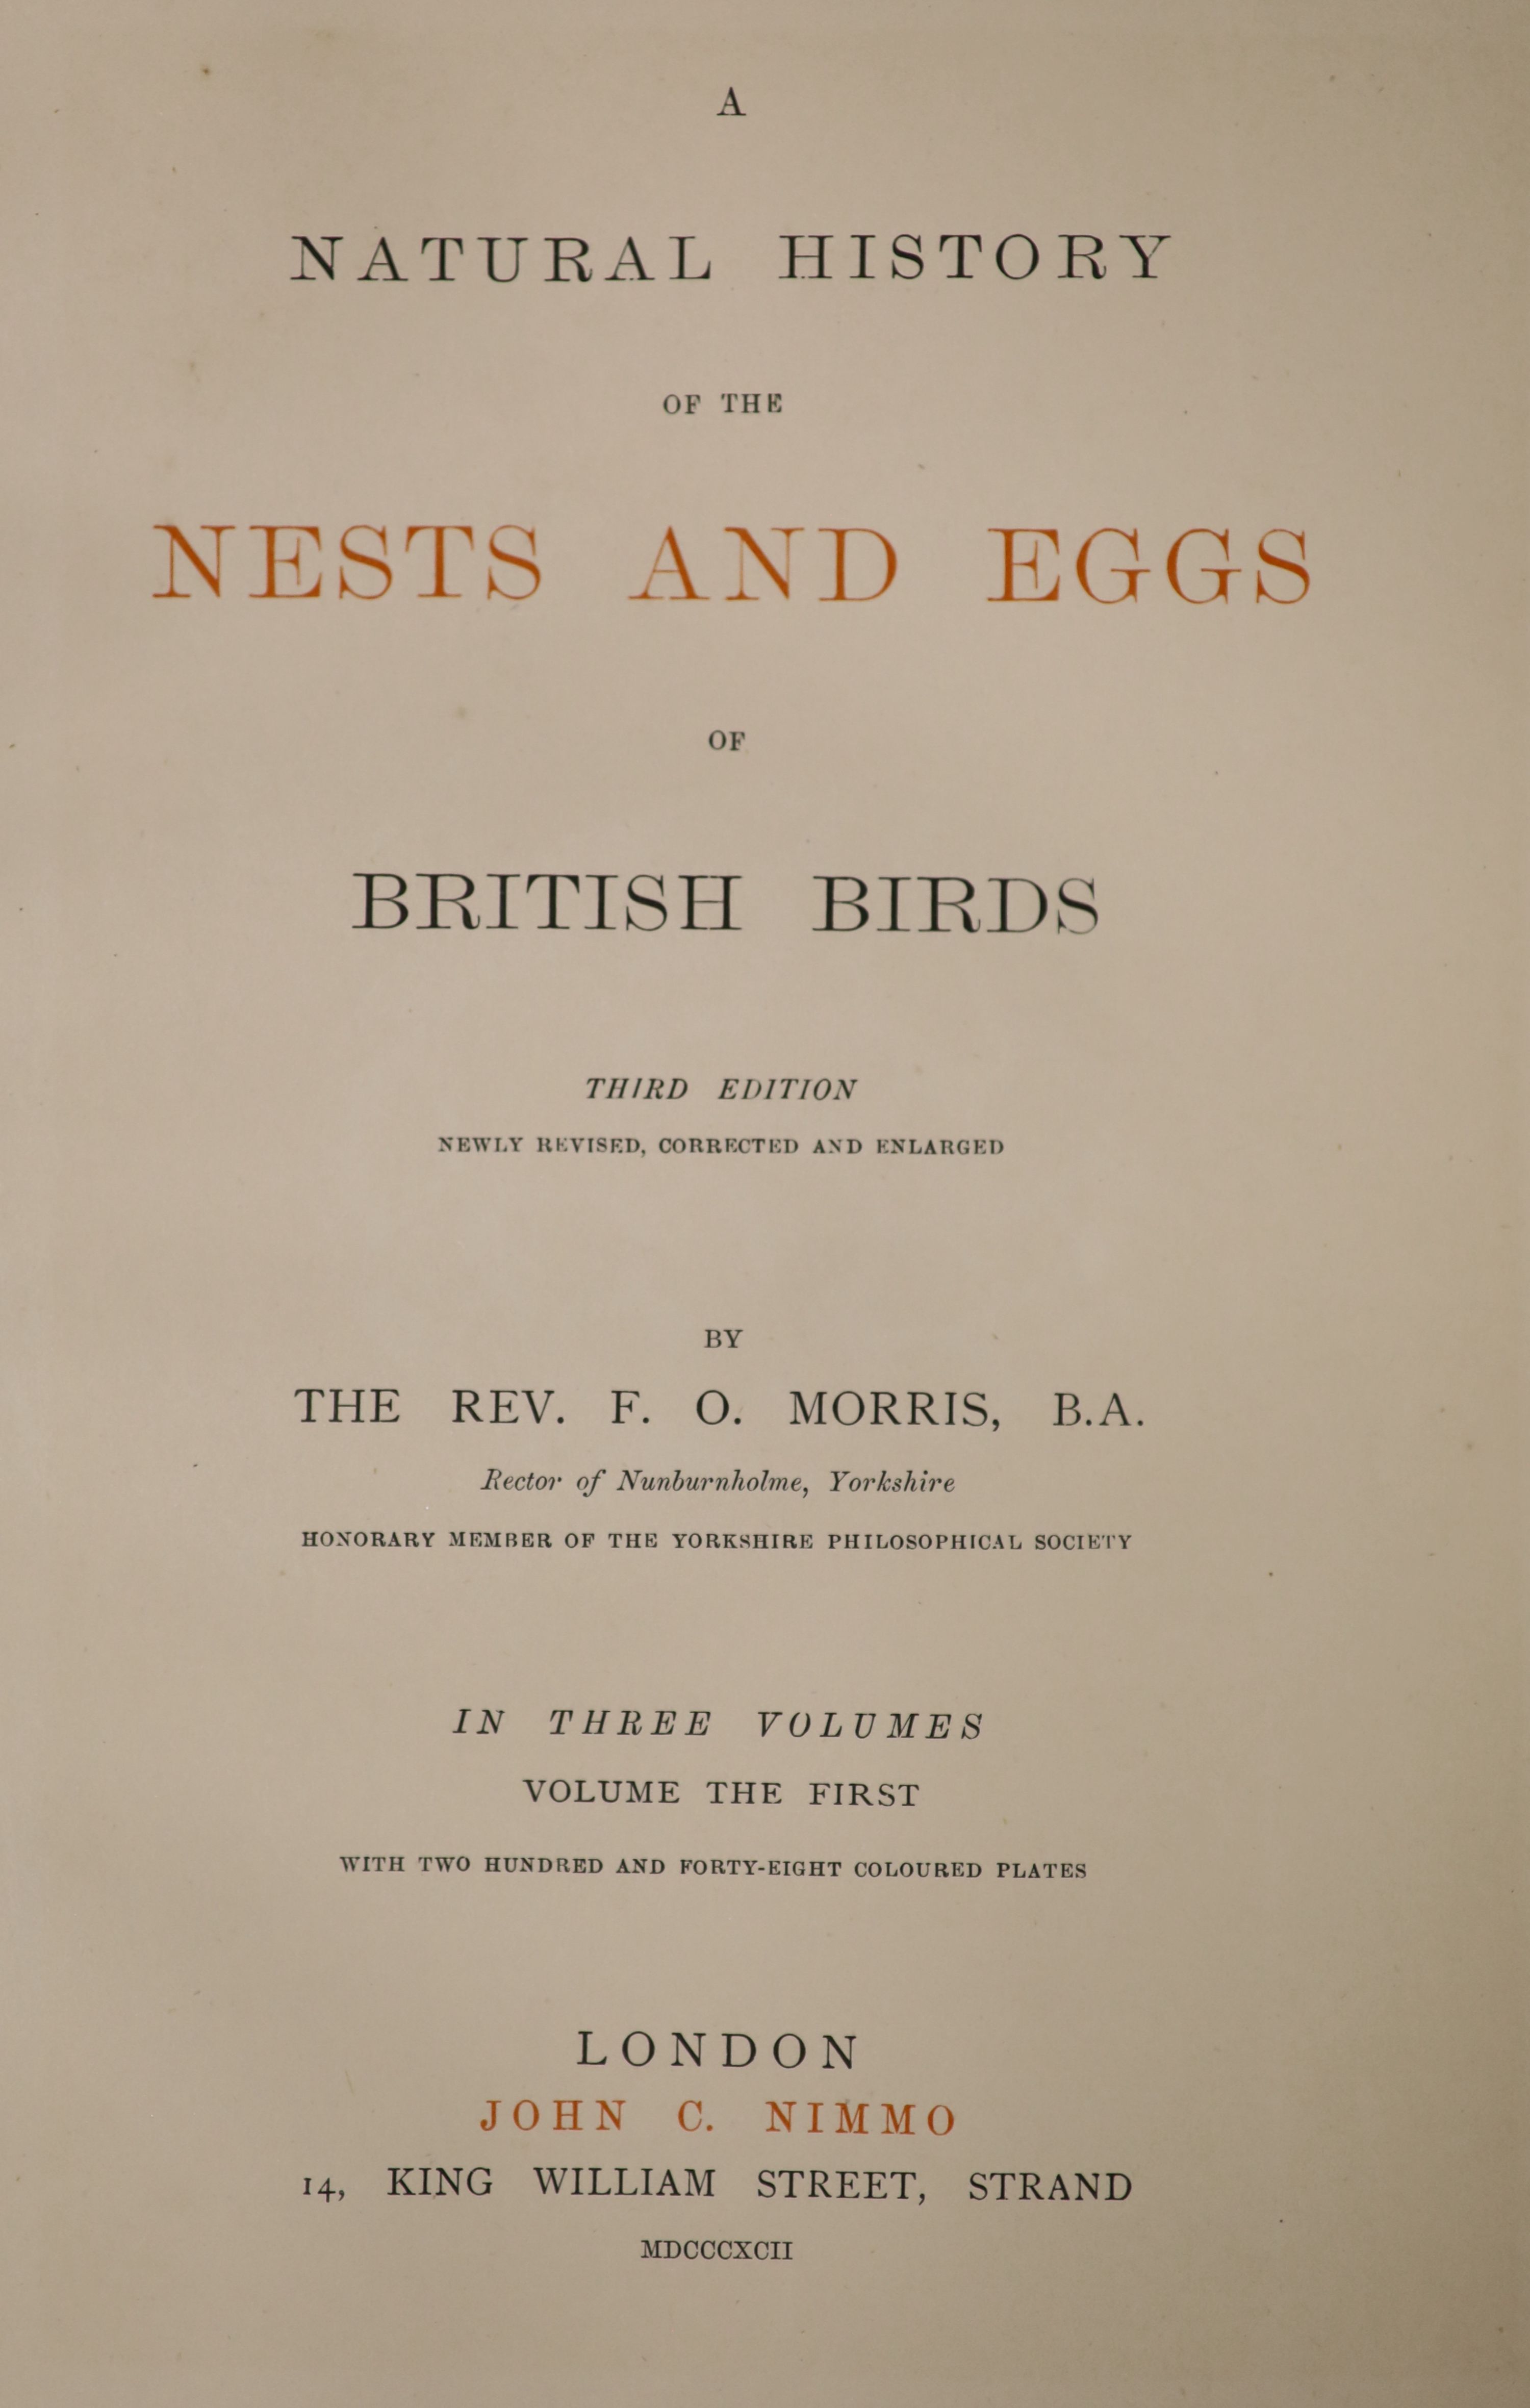 Morris, Rev. Francis Orpen - A Natural History of the Nests and Eggs of British Birds, 3rd edition, 3 vols, qto, half green morocco, marbled boards, 248 coloured plates, John C. Nimmo, London, 1892